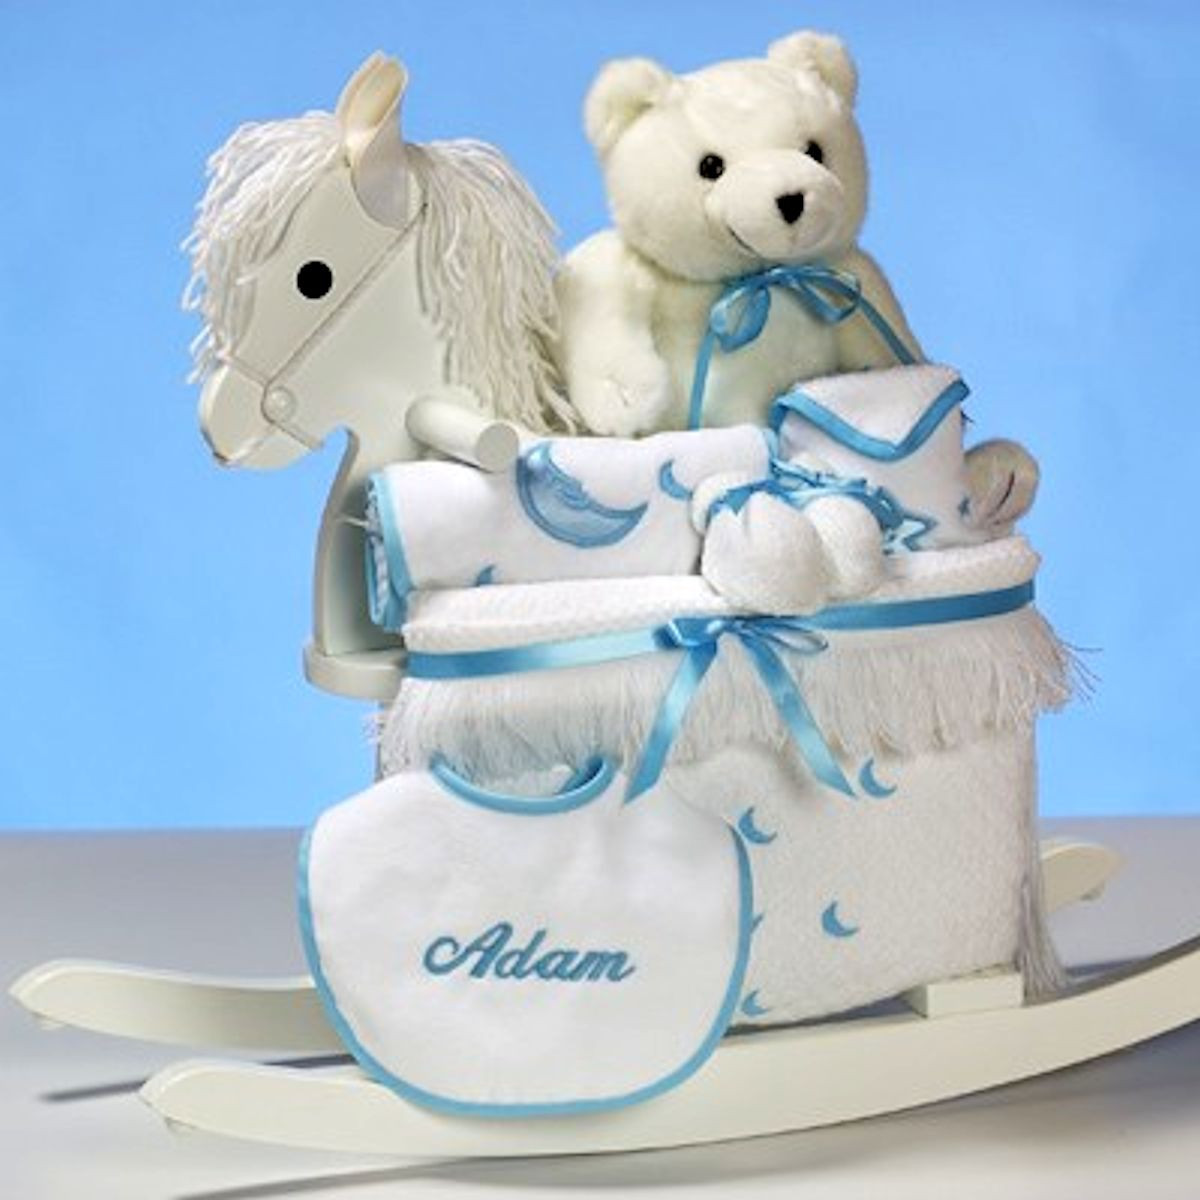 Personal Baby Shower Gift Ideas
 Personalized Baby Boy Gifts